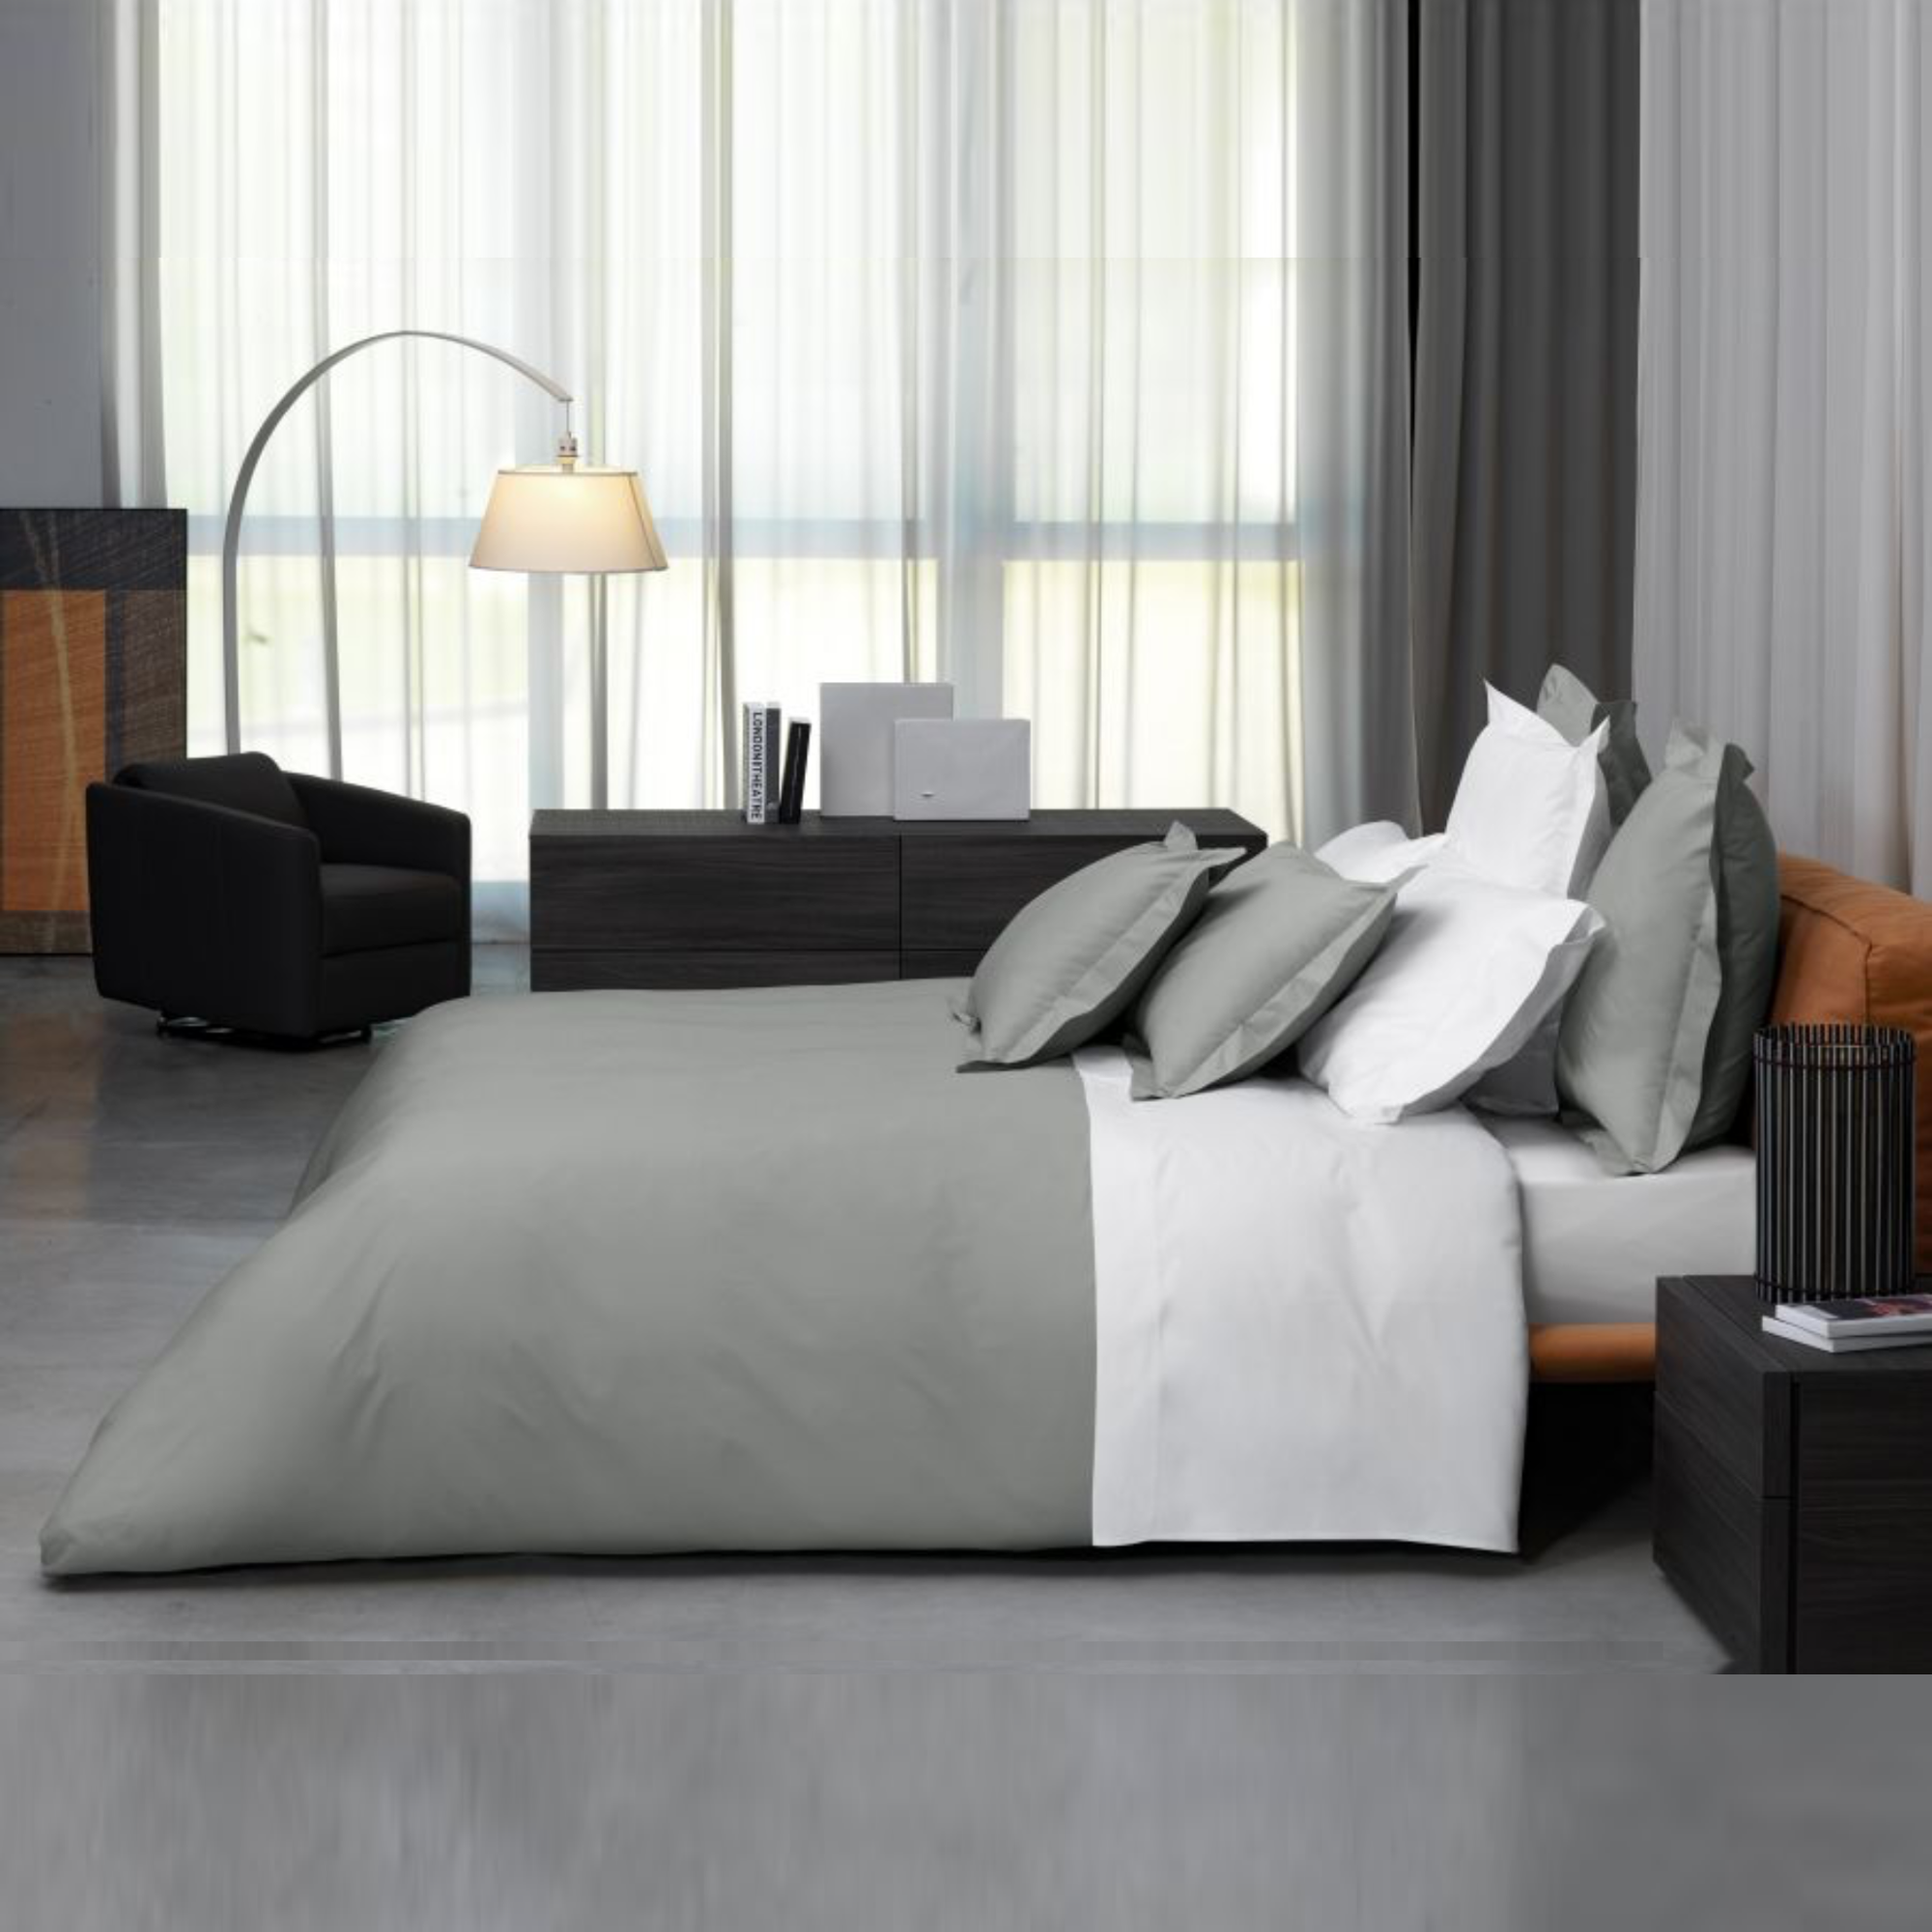 Full Bed Dressed in Signoria Gemma Bedding in Silver Moon Color